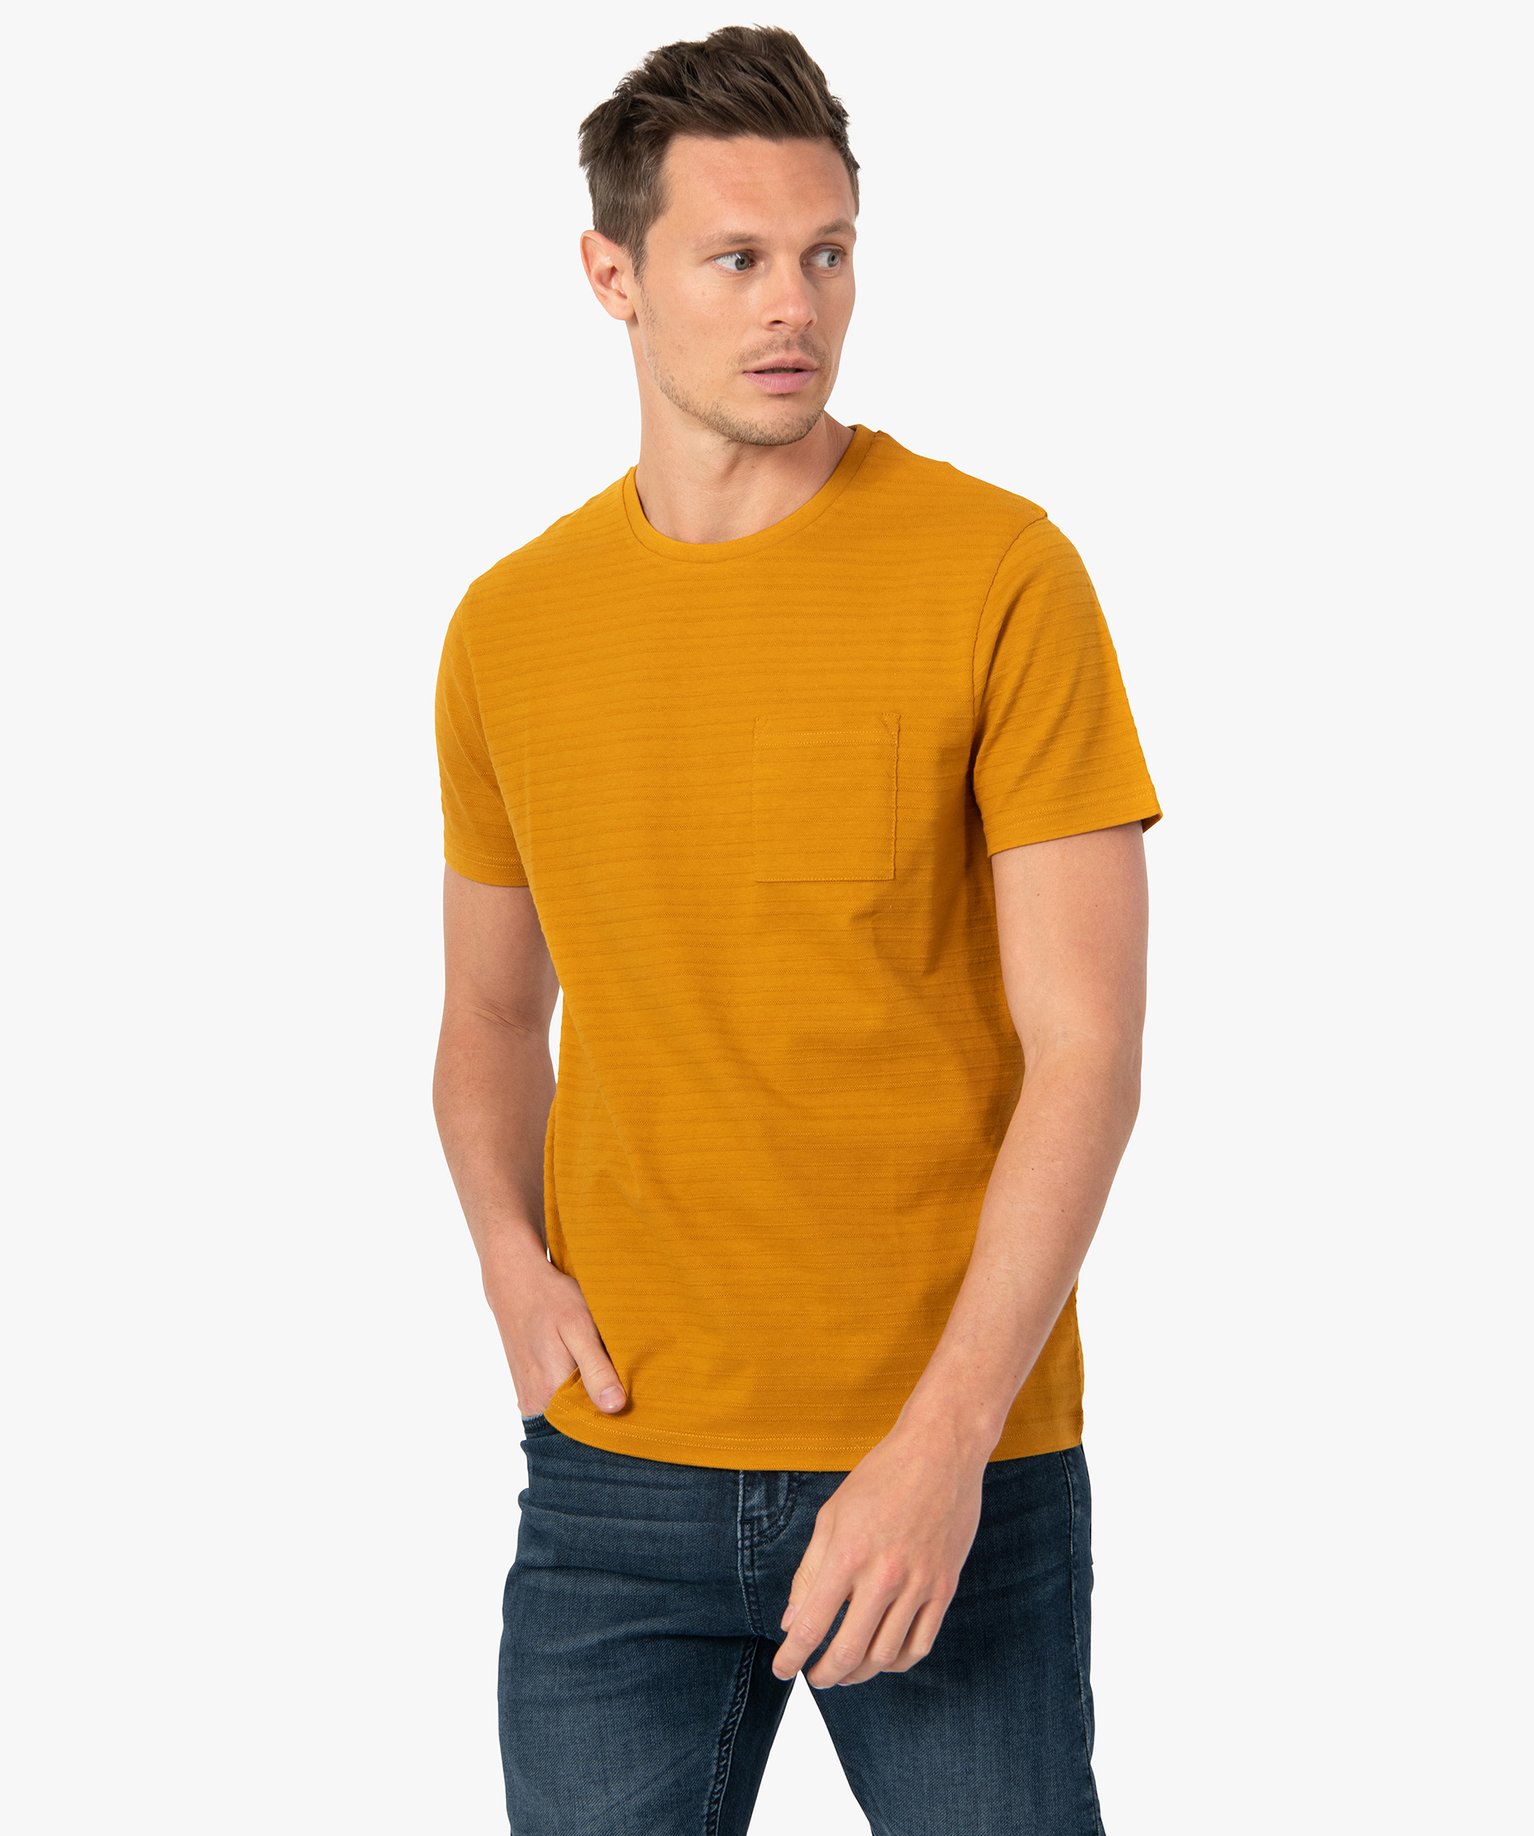 tee-shirt homme a manches courtes uni a imprime relief jaune tee-shirts